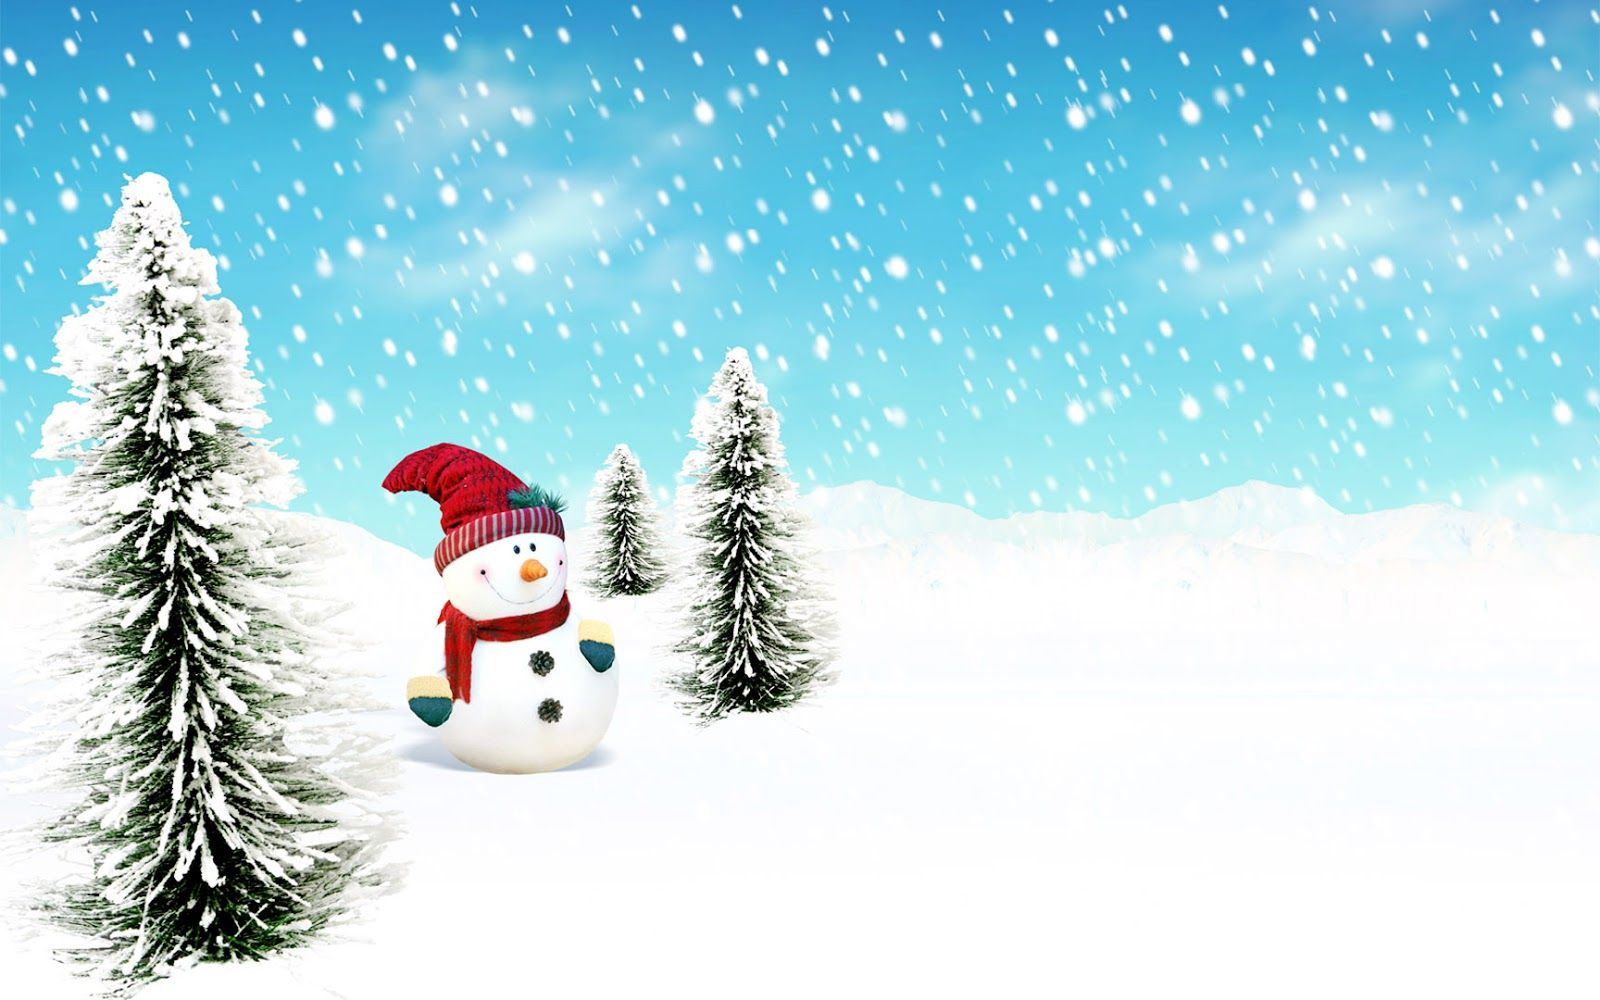 750 Snowman Pictures  Download Free Images on Unsplash